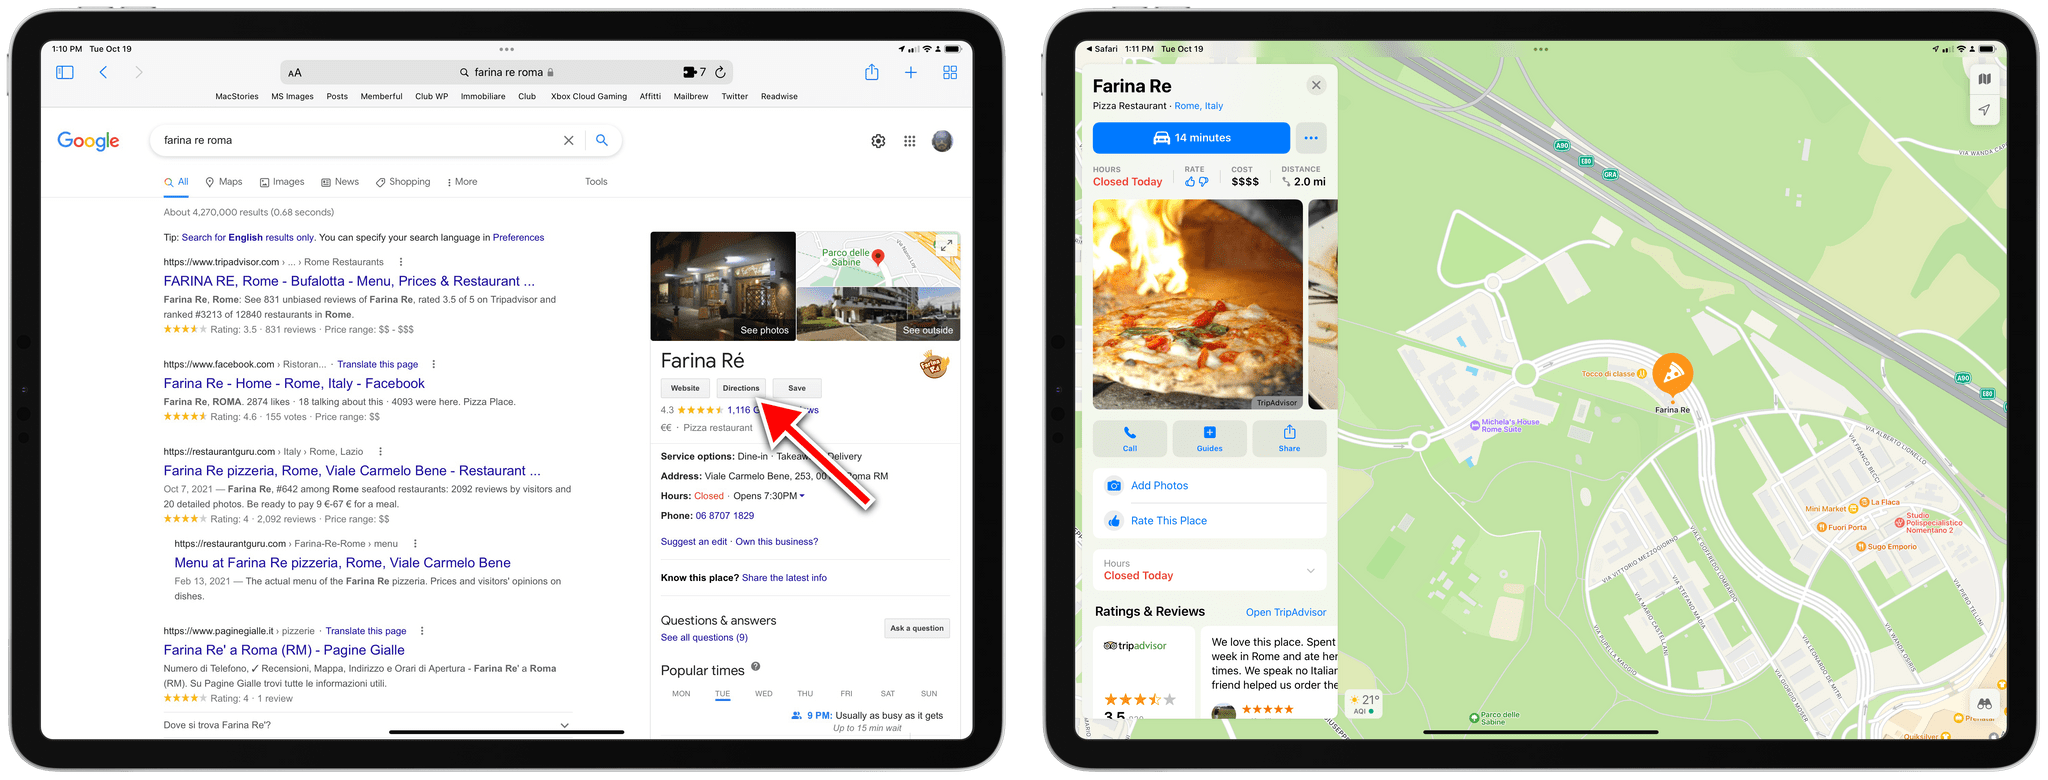 Google Maps links from Google search get redirected to Apple Maps thanks to the Mapper extension.